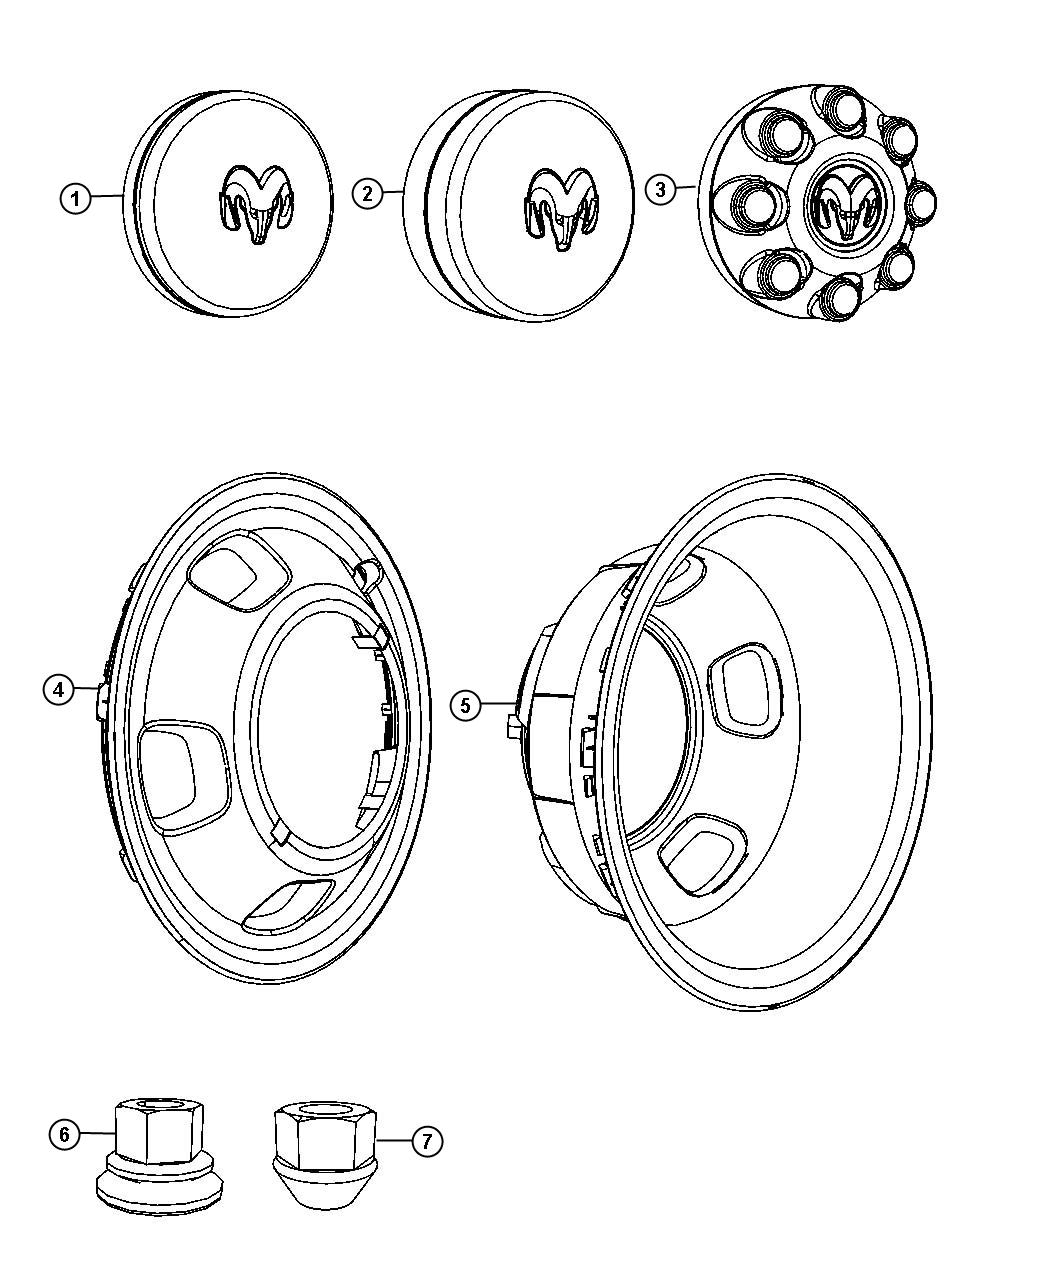 Diagram Wheel Covers and Center Caps. for your 2018 Ram 3500  <10K LB. CREW CAB CHASSIS 